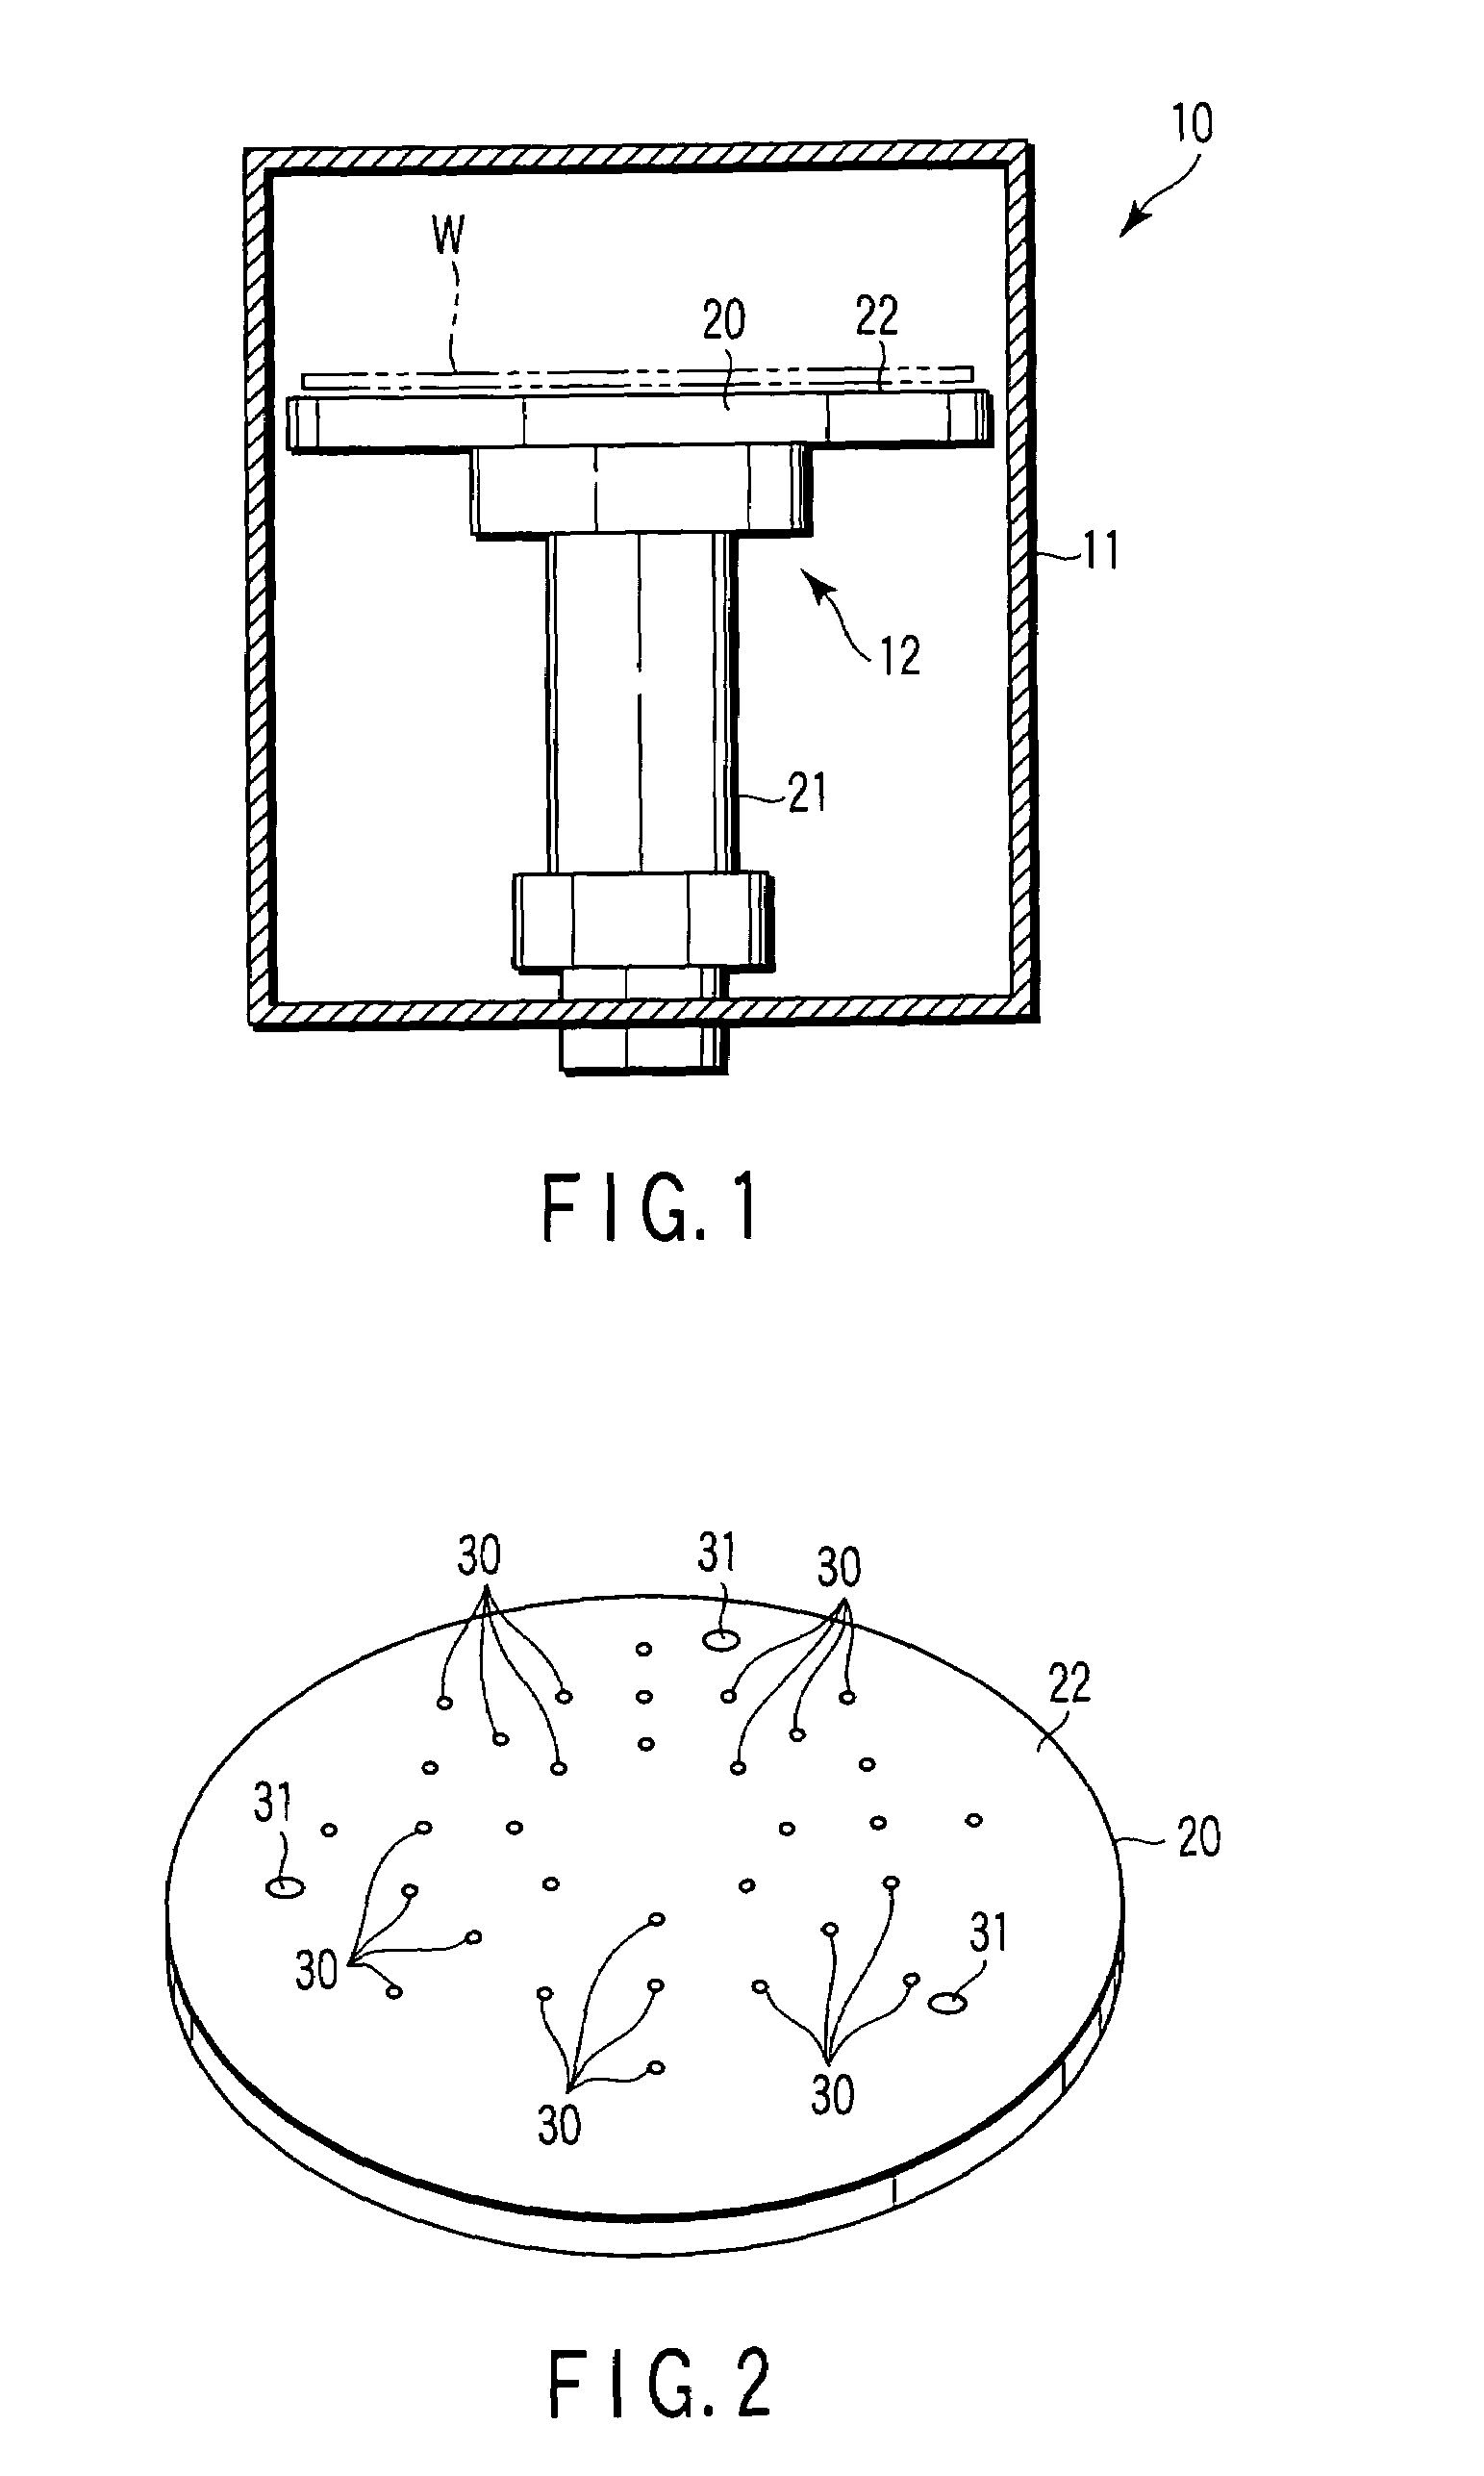 Substrate supporting apparatus